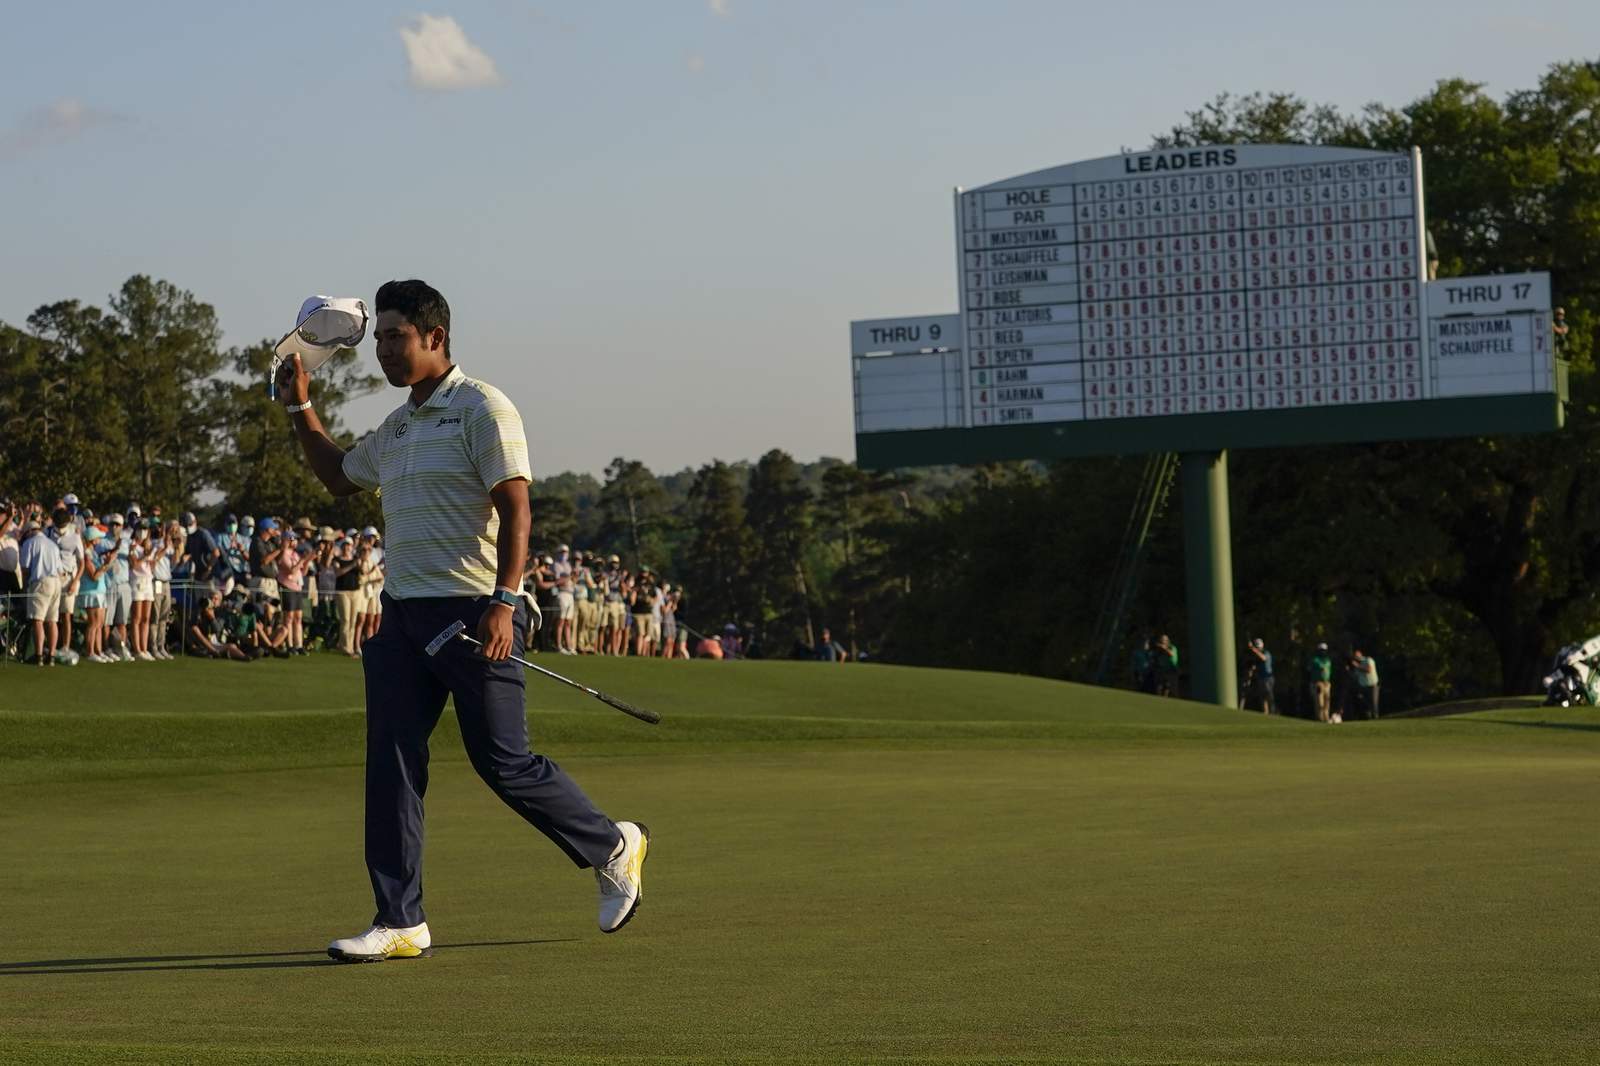 Masters is a win for Hideki Matsuyama, and for Japan